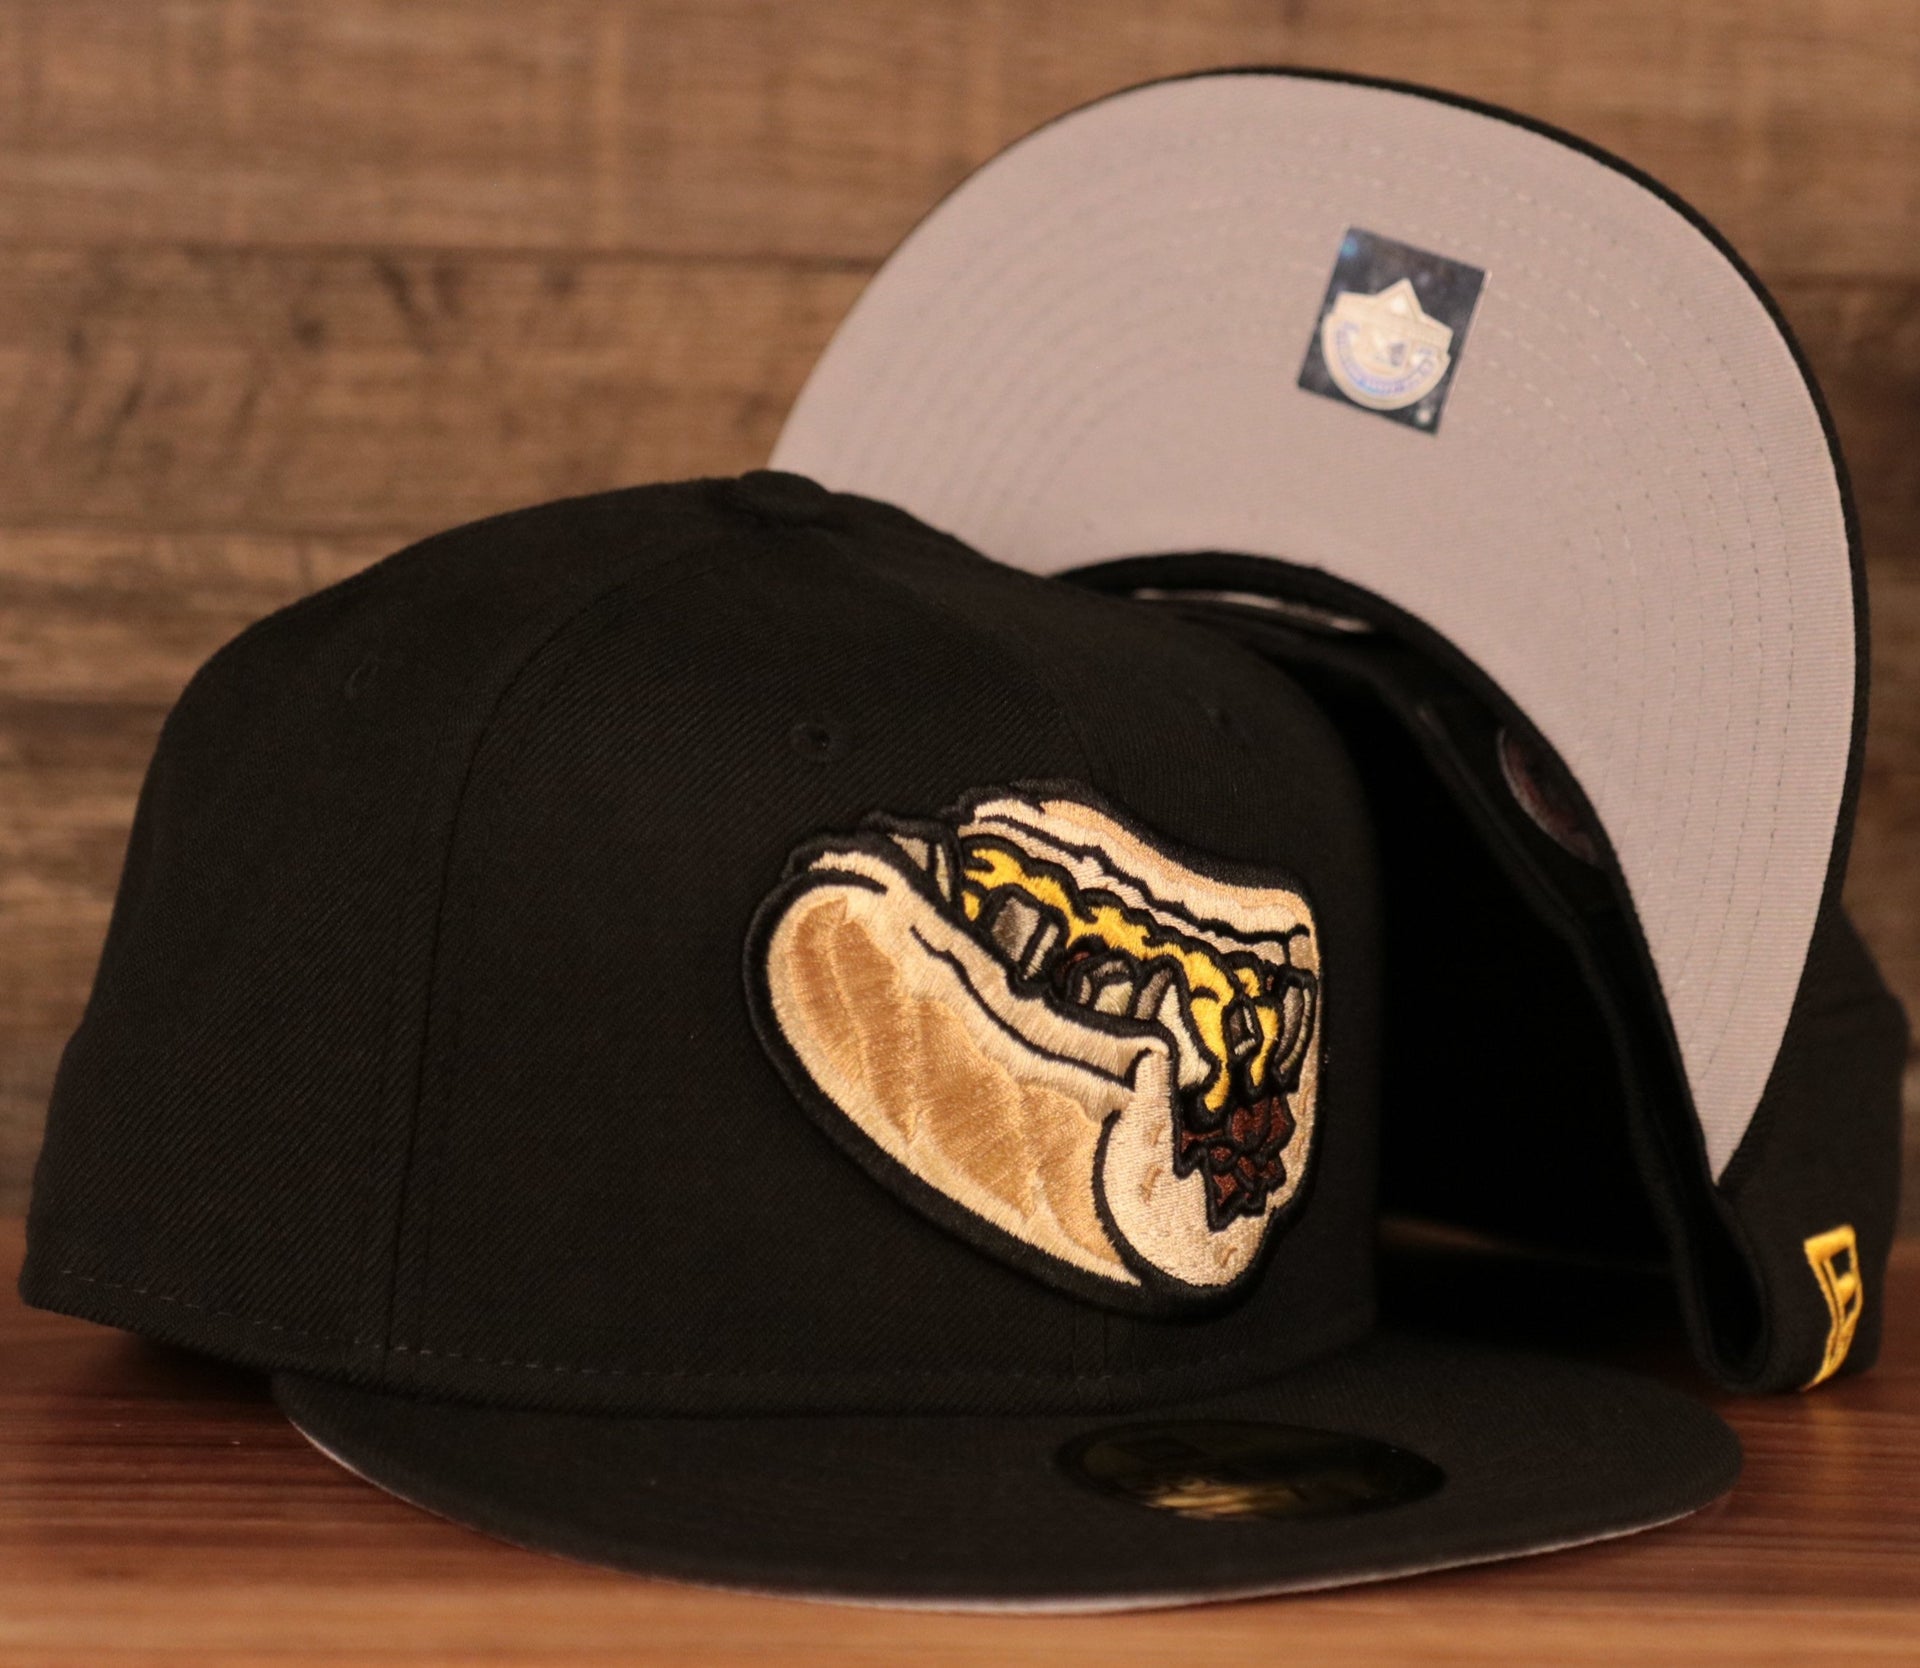 The black Philly cheeseteak with onions New Era fitted cap.